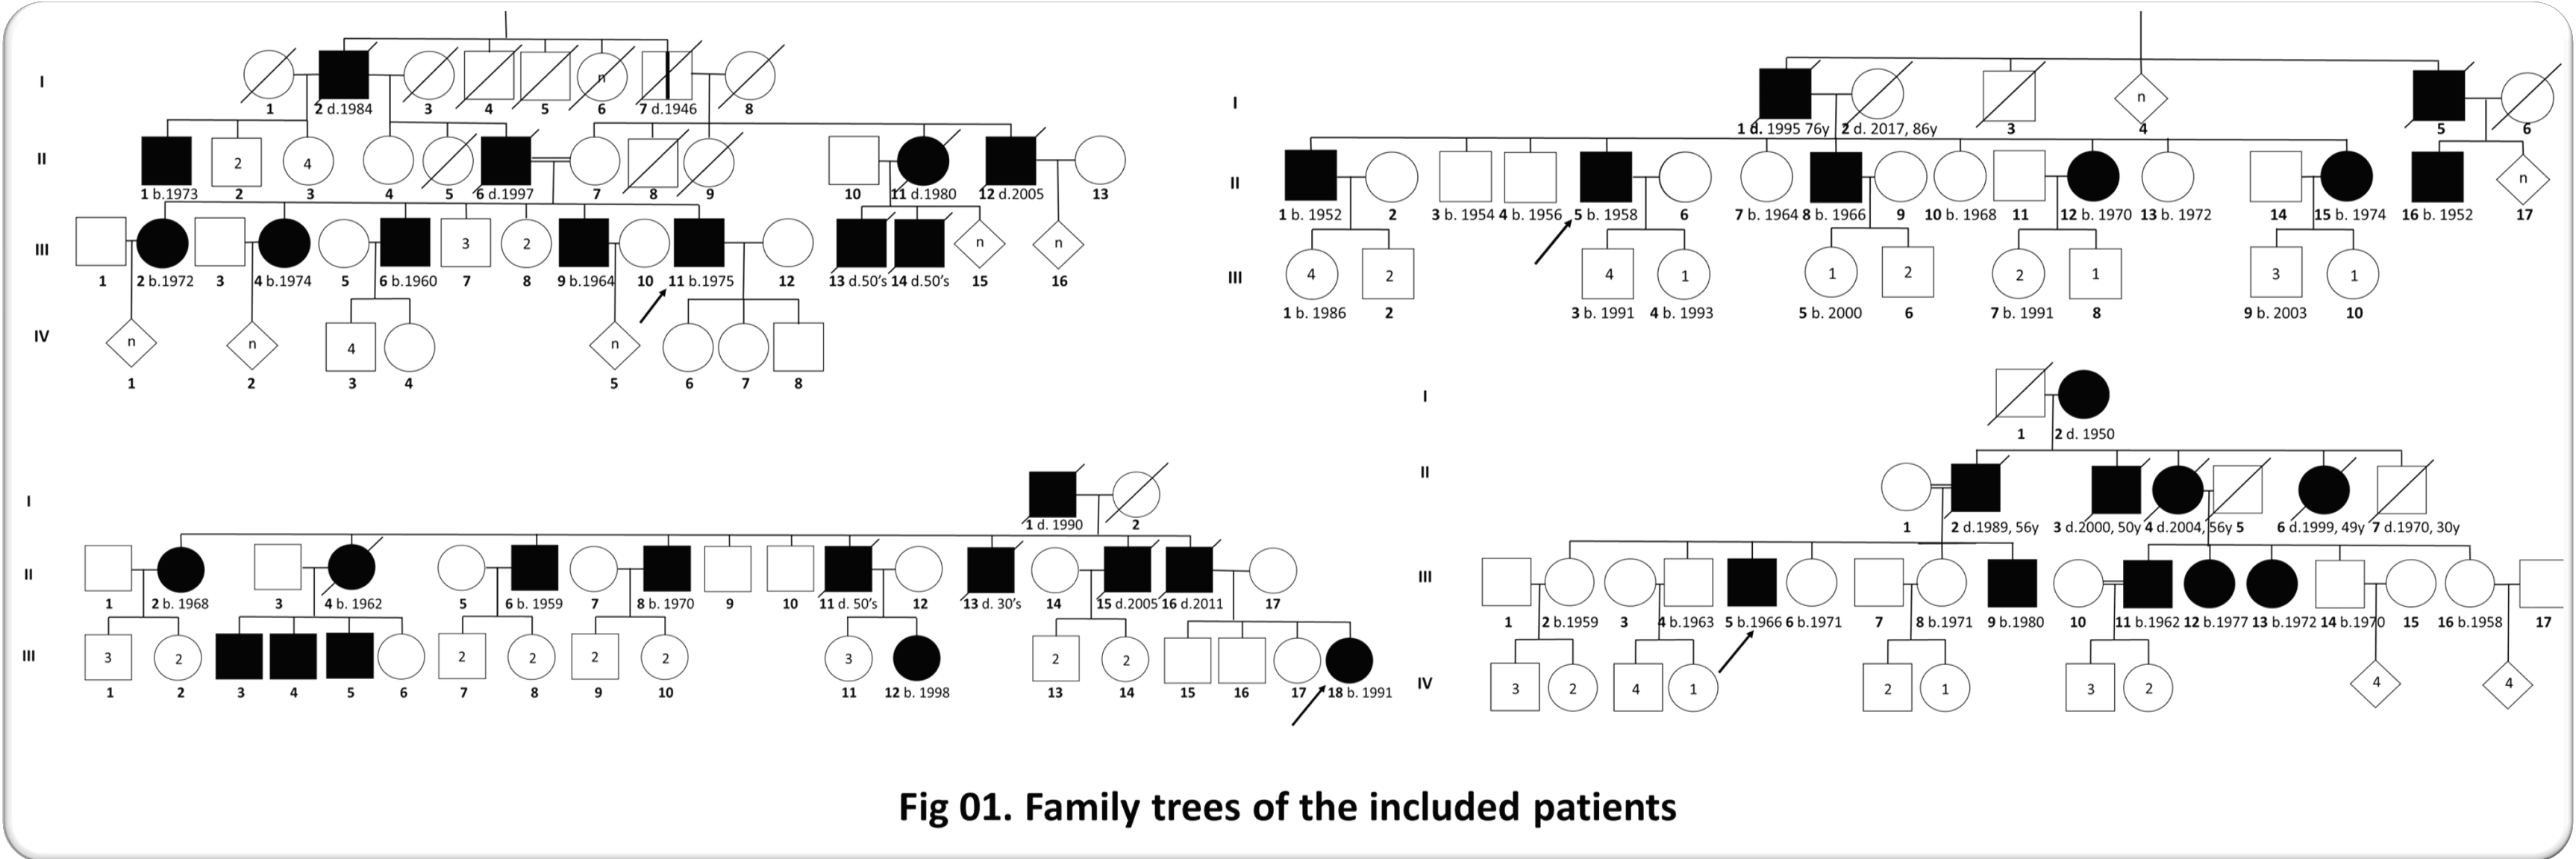 Fig 01 Family trees of the included patients